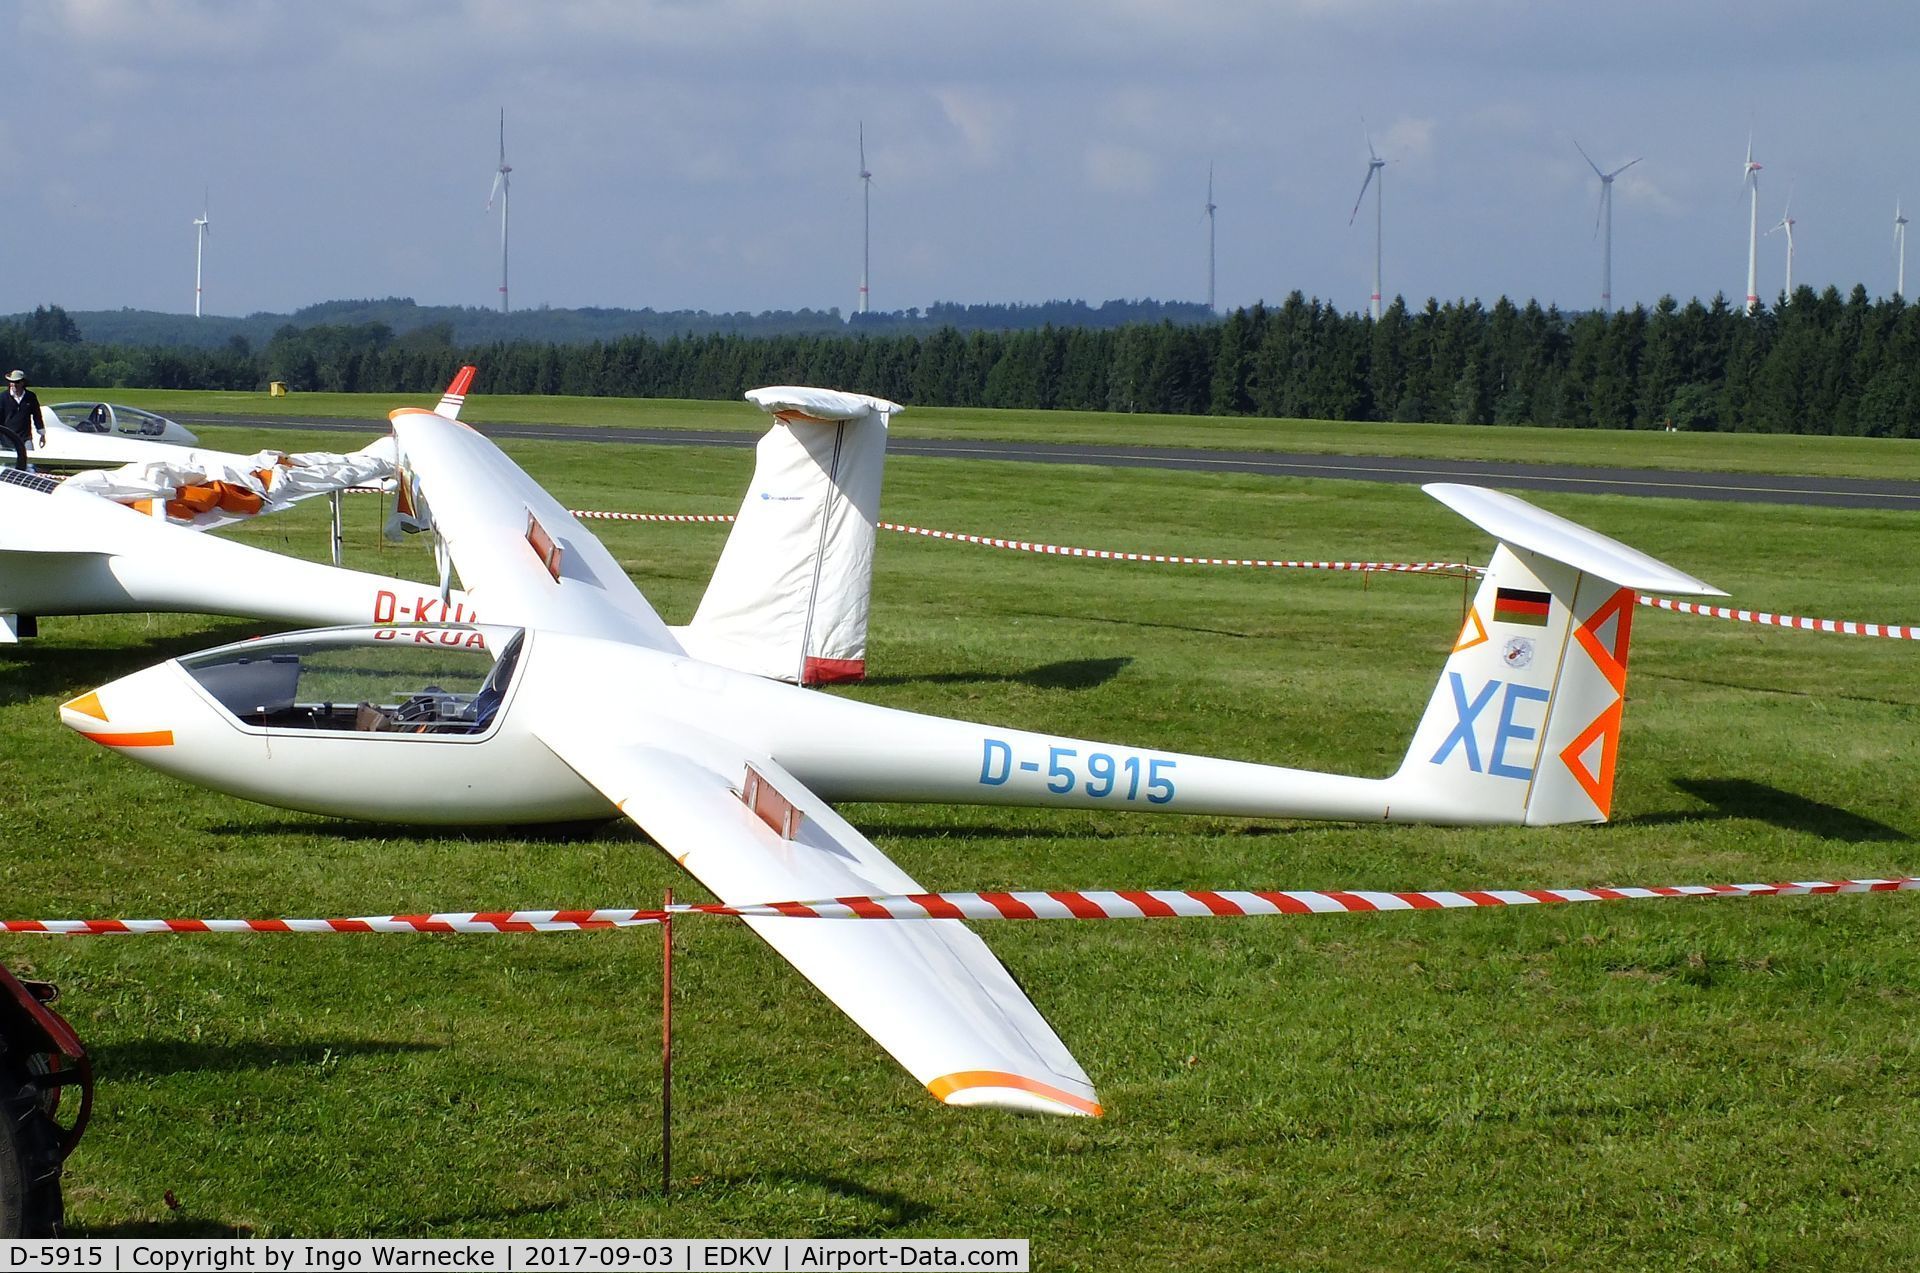 D-5915, Grob G-102 Astir CS Jeans C/N Not found D-5915, Grob G.102 Astir CS Jeans at the Dahlemer Binz 60th jubilee airfield display